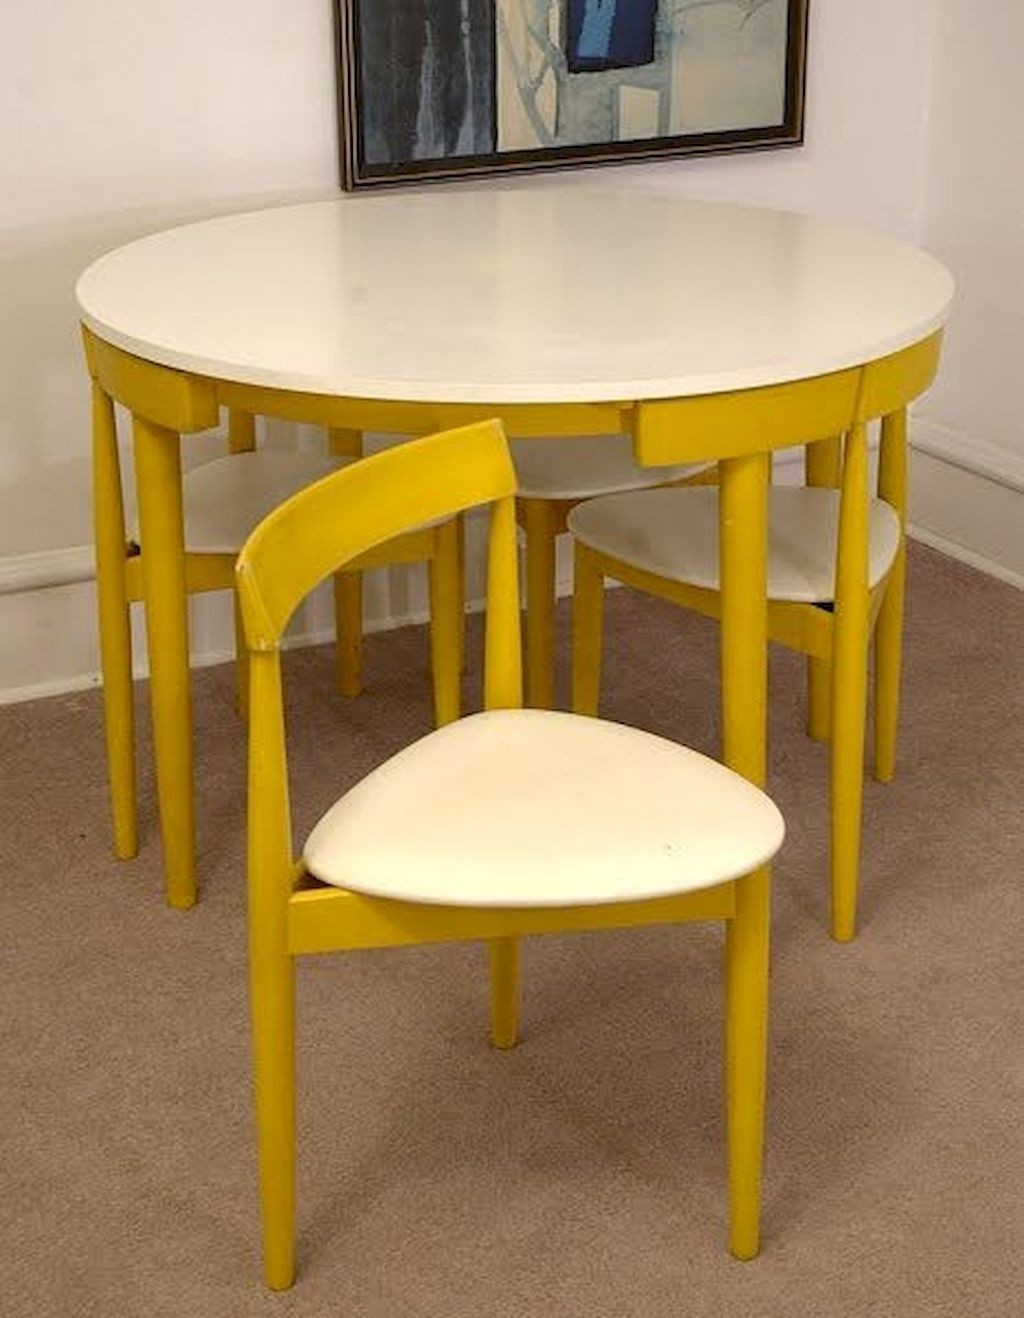 Dinette tables for small spaces